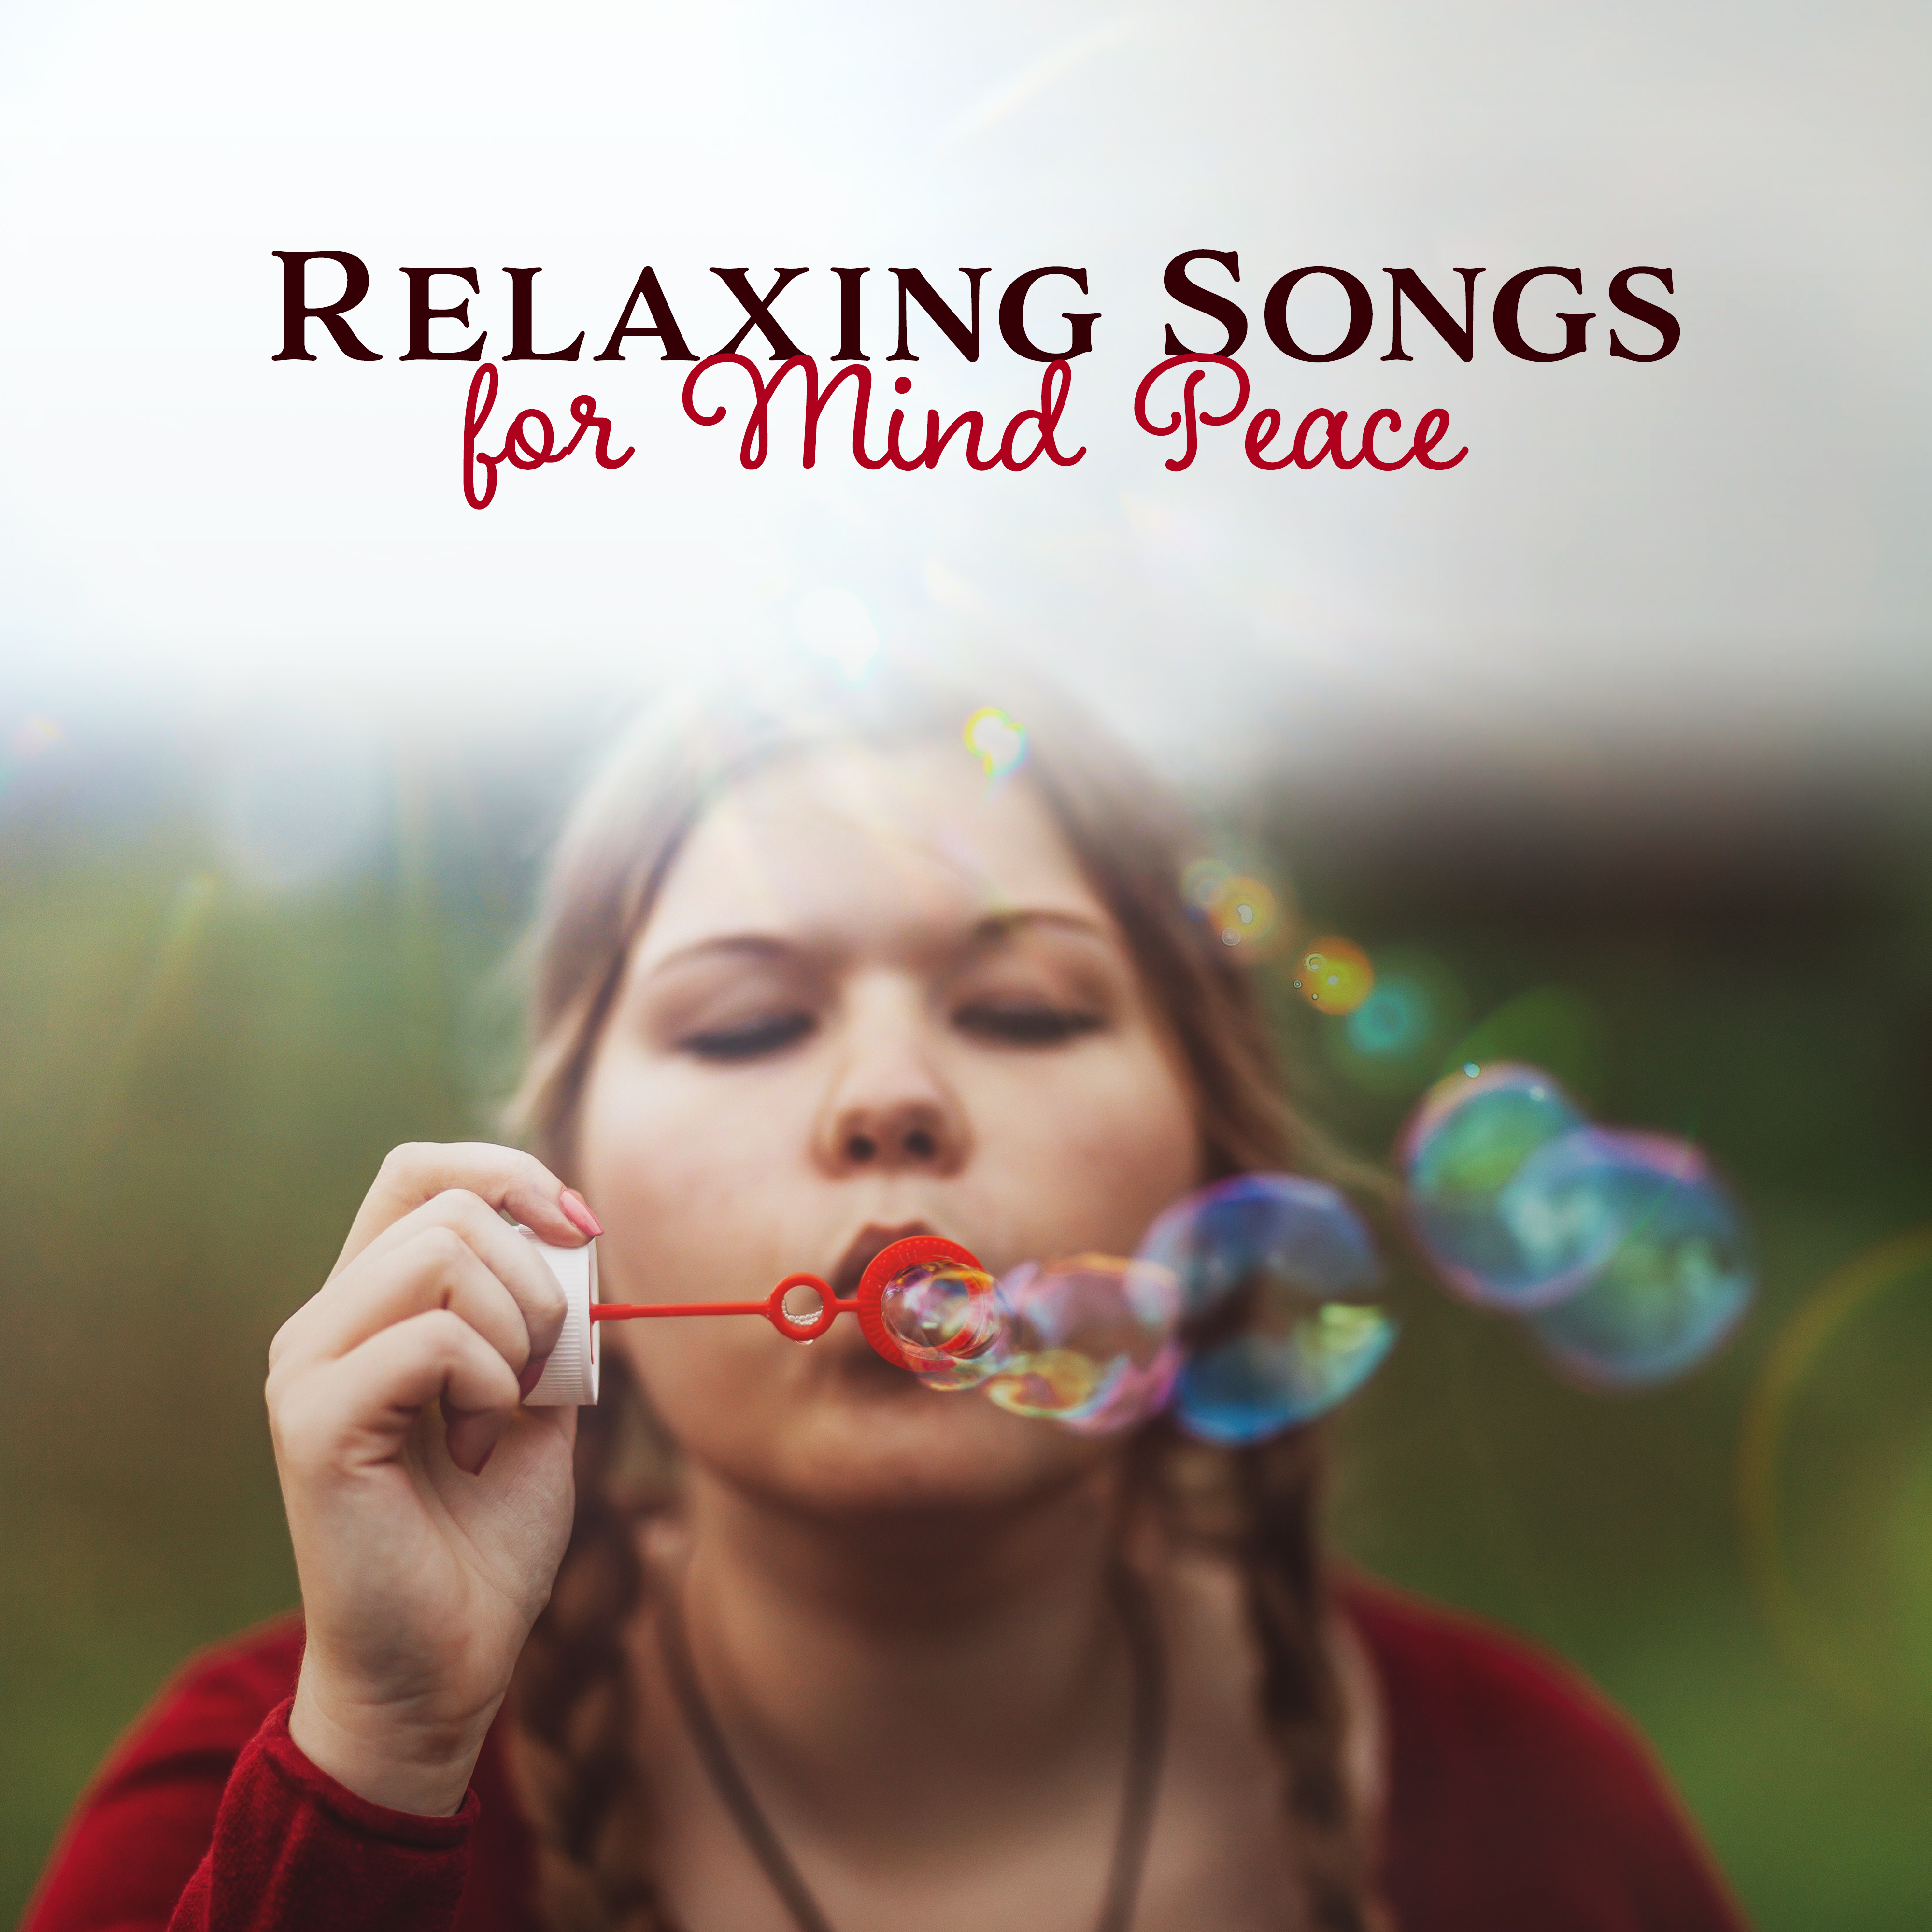 Relaxing Songs for Mind Peace – Calming Sounds, Soothing Waves, New Age Rest, Peaceful Music, Stress Free